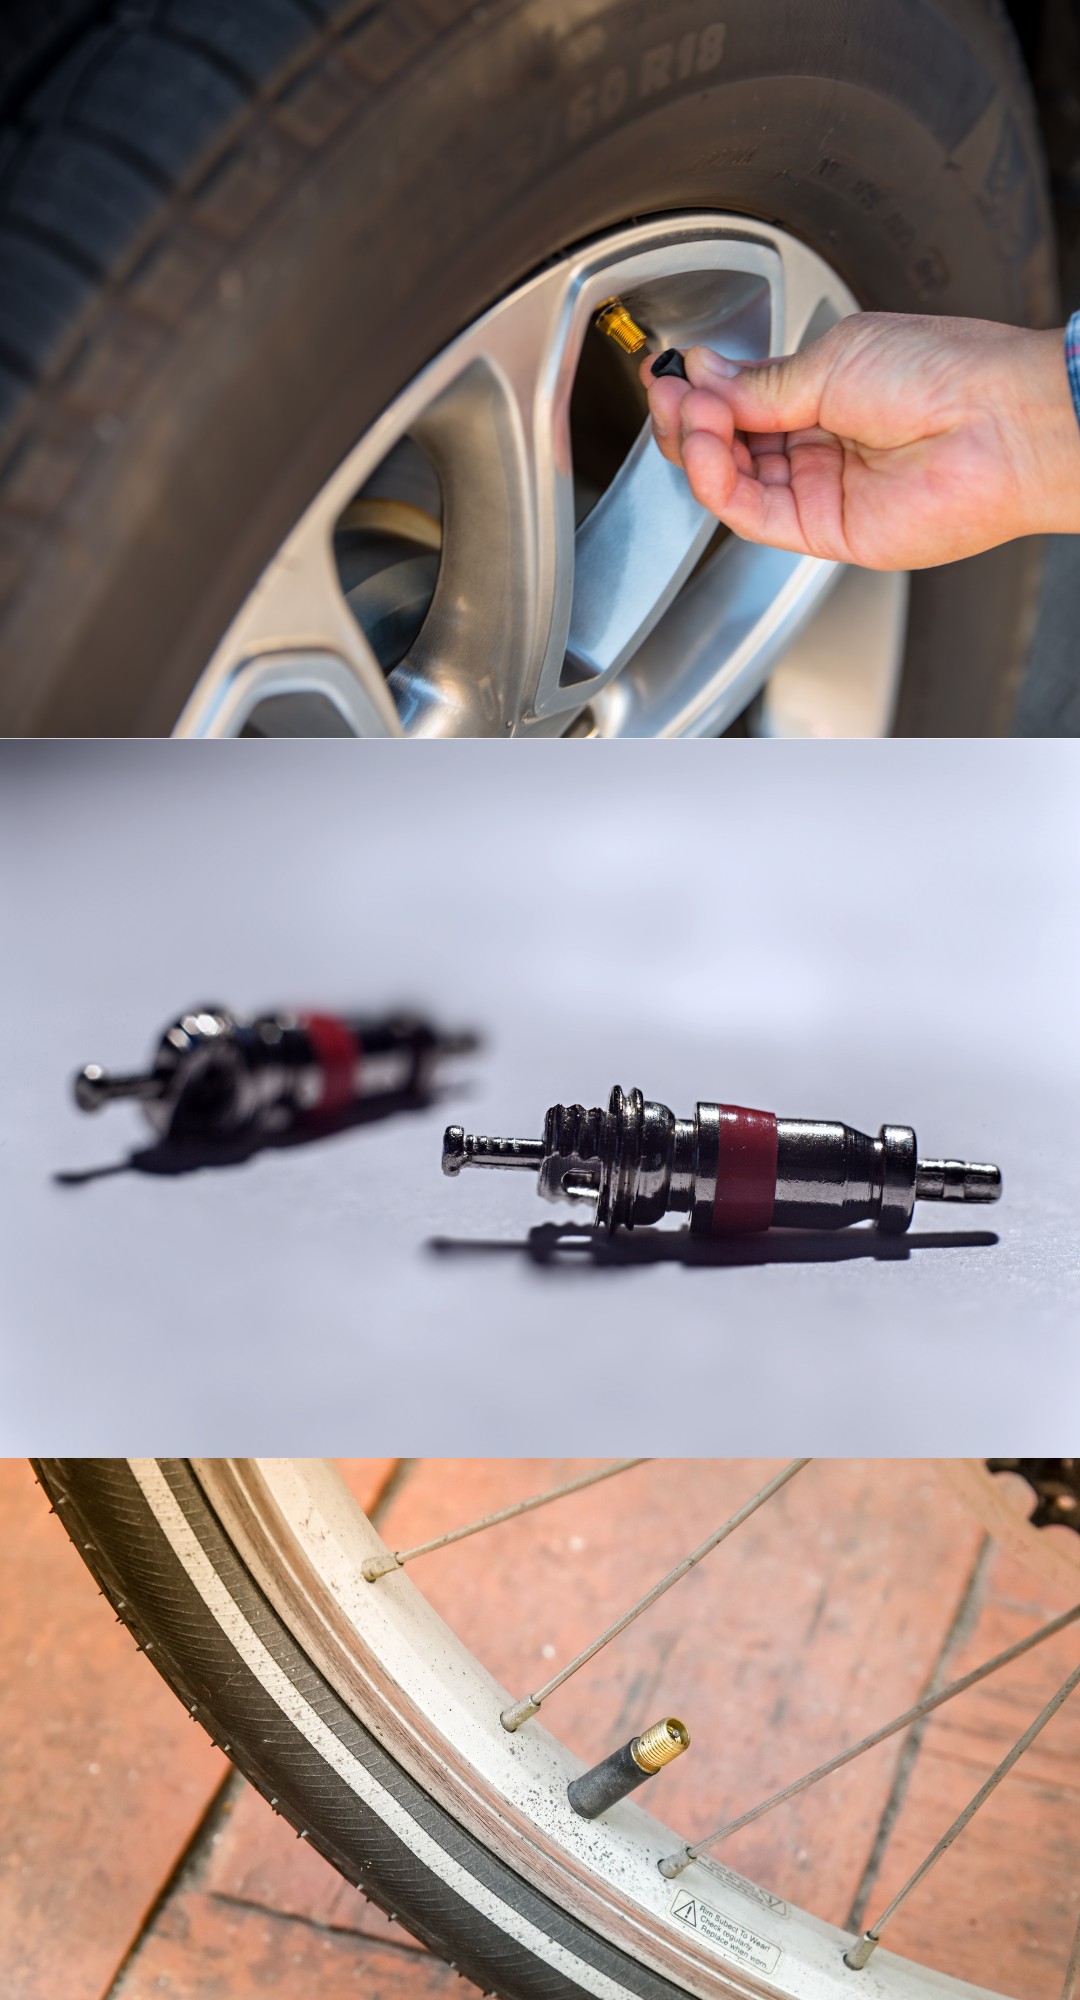 5 Differences Between Bicycle Tire Valves and Car Tire Valves